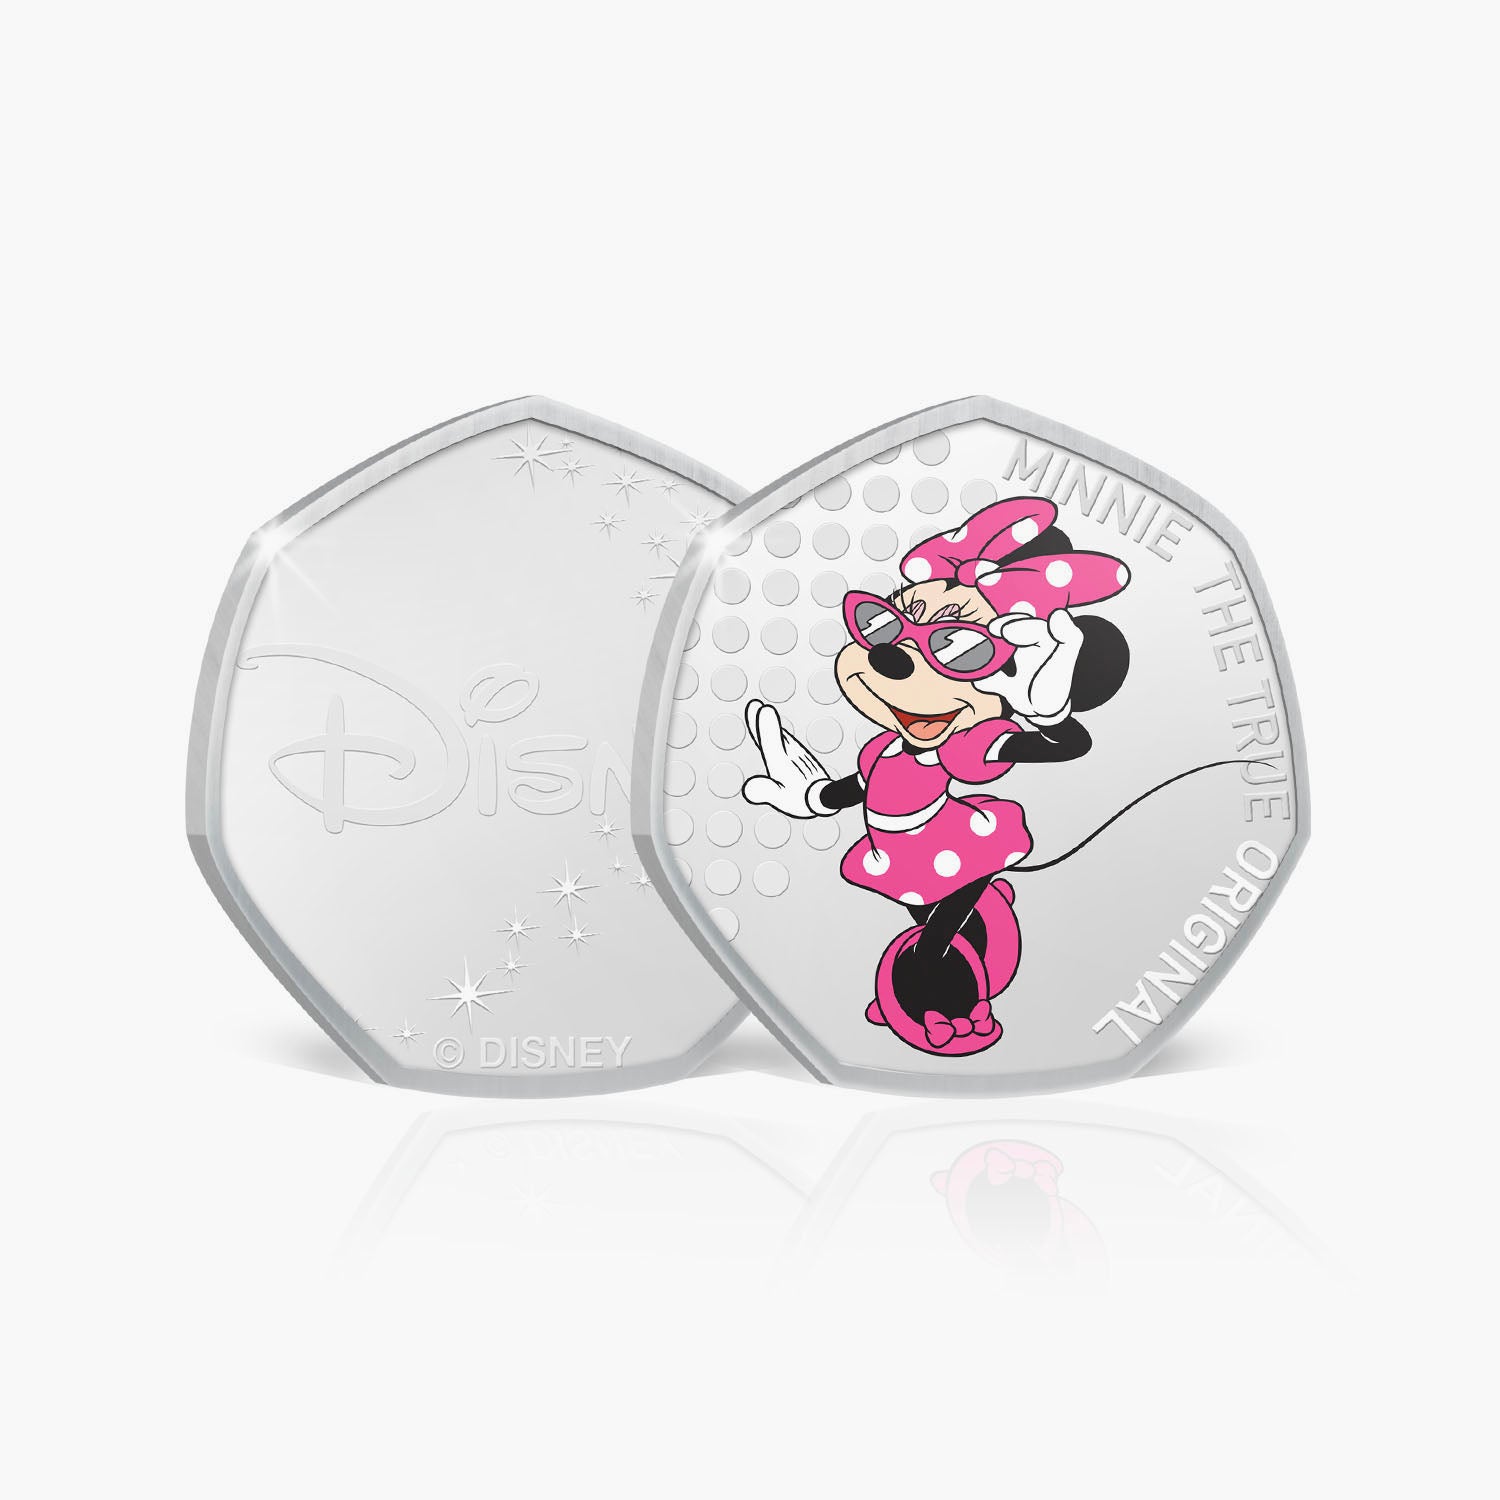 Minnie Bow-tique Silver-Plated Commemorative